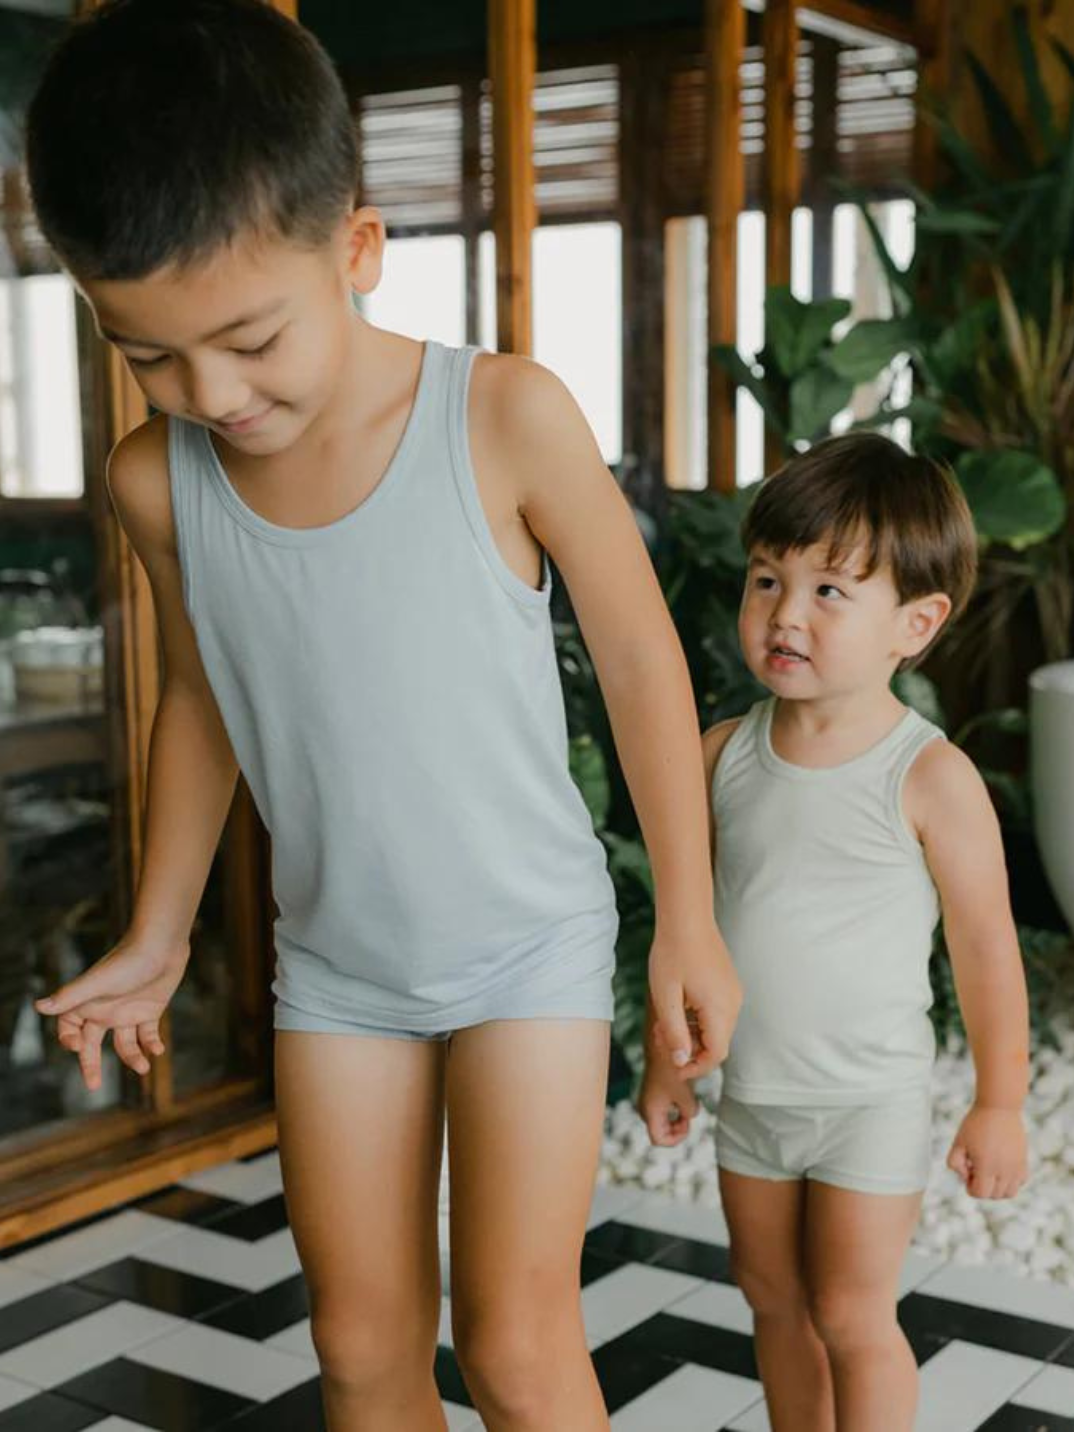 These tank tops are super soft and gentle on your little ones' skin. Designed with a loose, unisex fit for play, movement and a comfy night's rest. Wear the breathable layer under garments for day or snooze in the ultimate comfort. Made with eco modal fabric. This set comes with: 1x green tank top and 1x blue tank top.